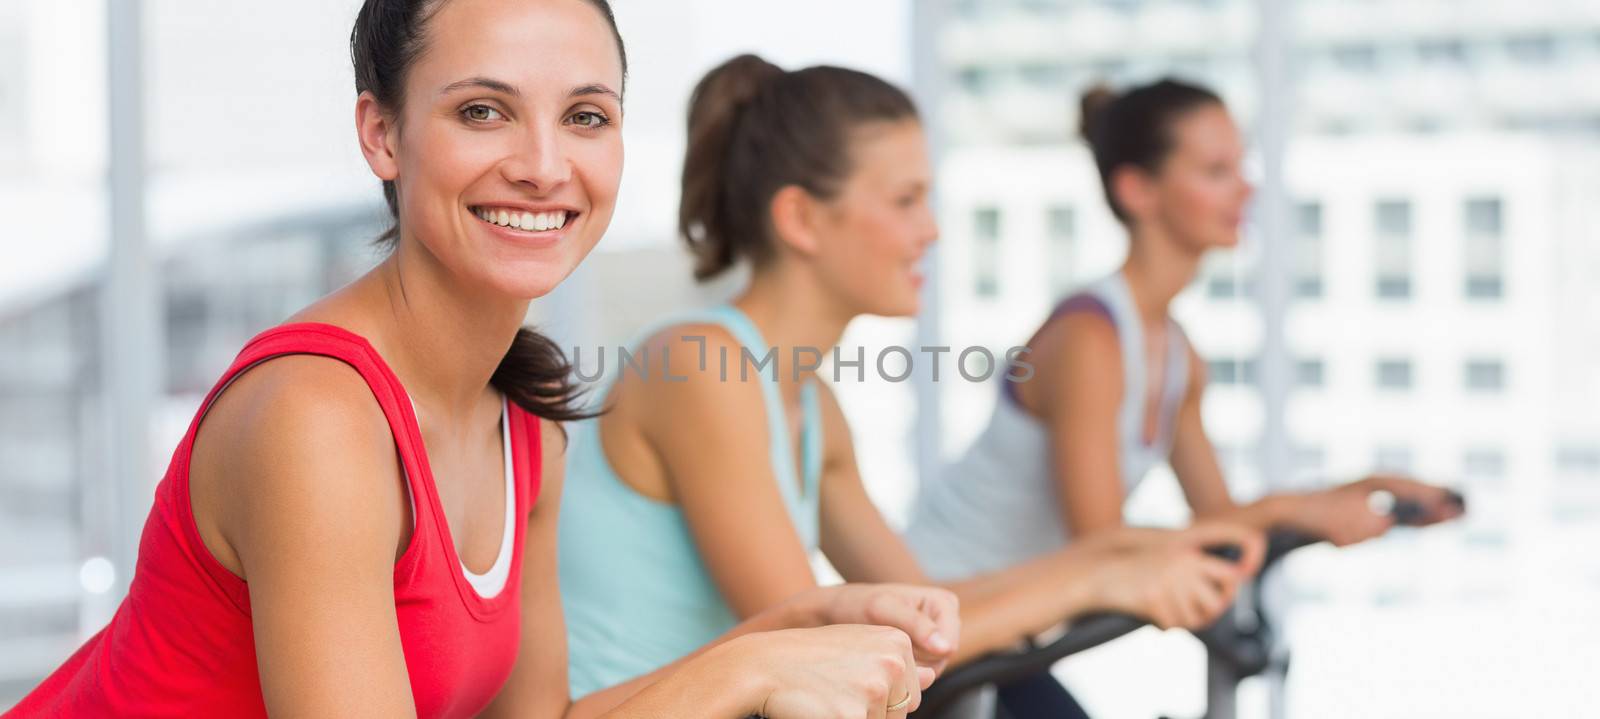 Fit people working out at spinning class by Wavebreakmedia